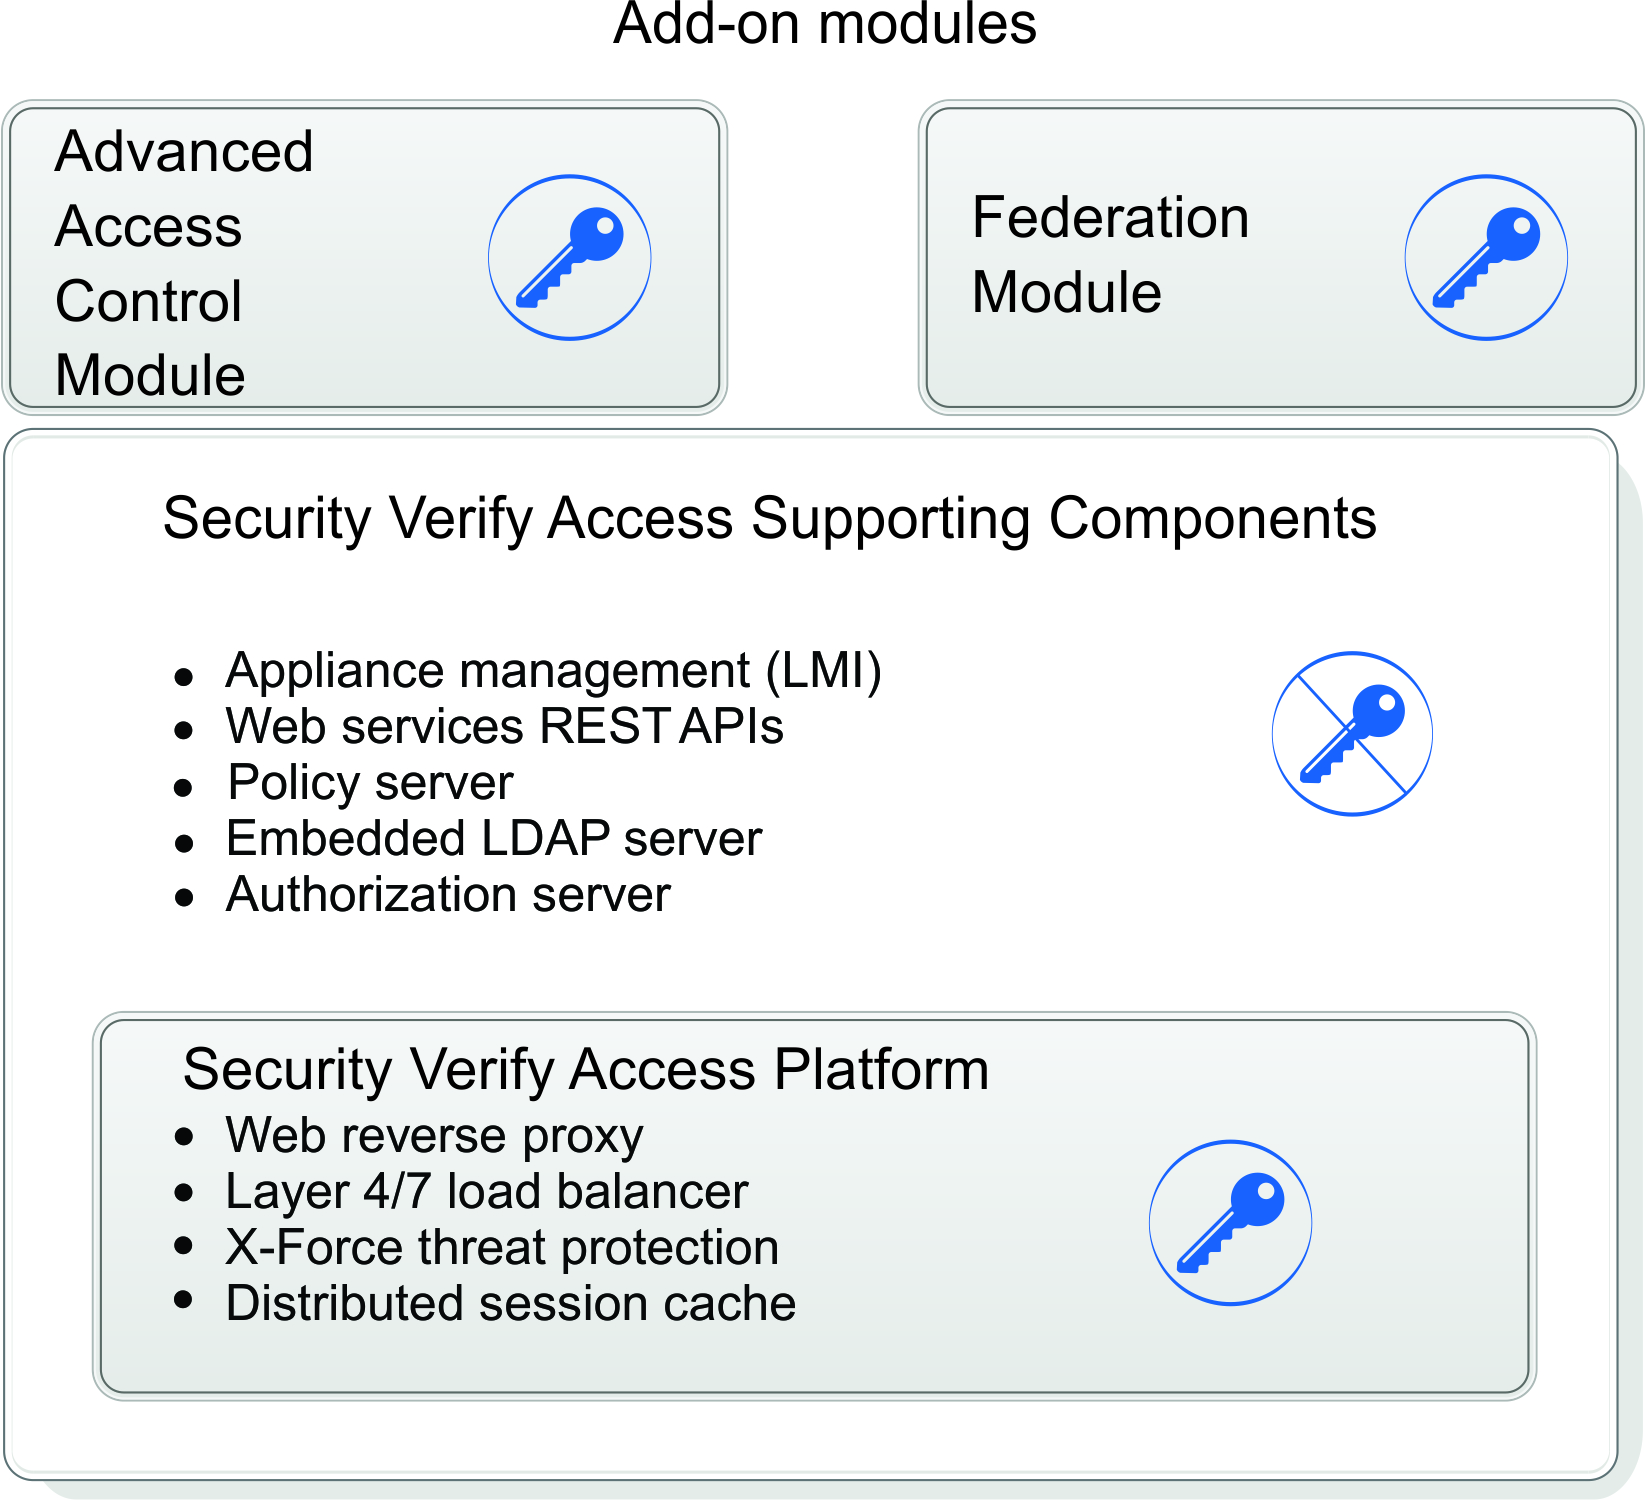 Product activation levels for the IBM Security Verify Access product